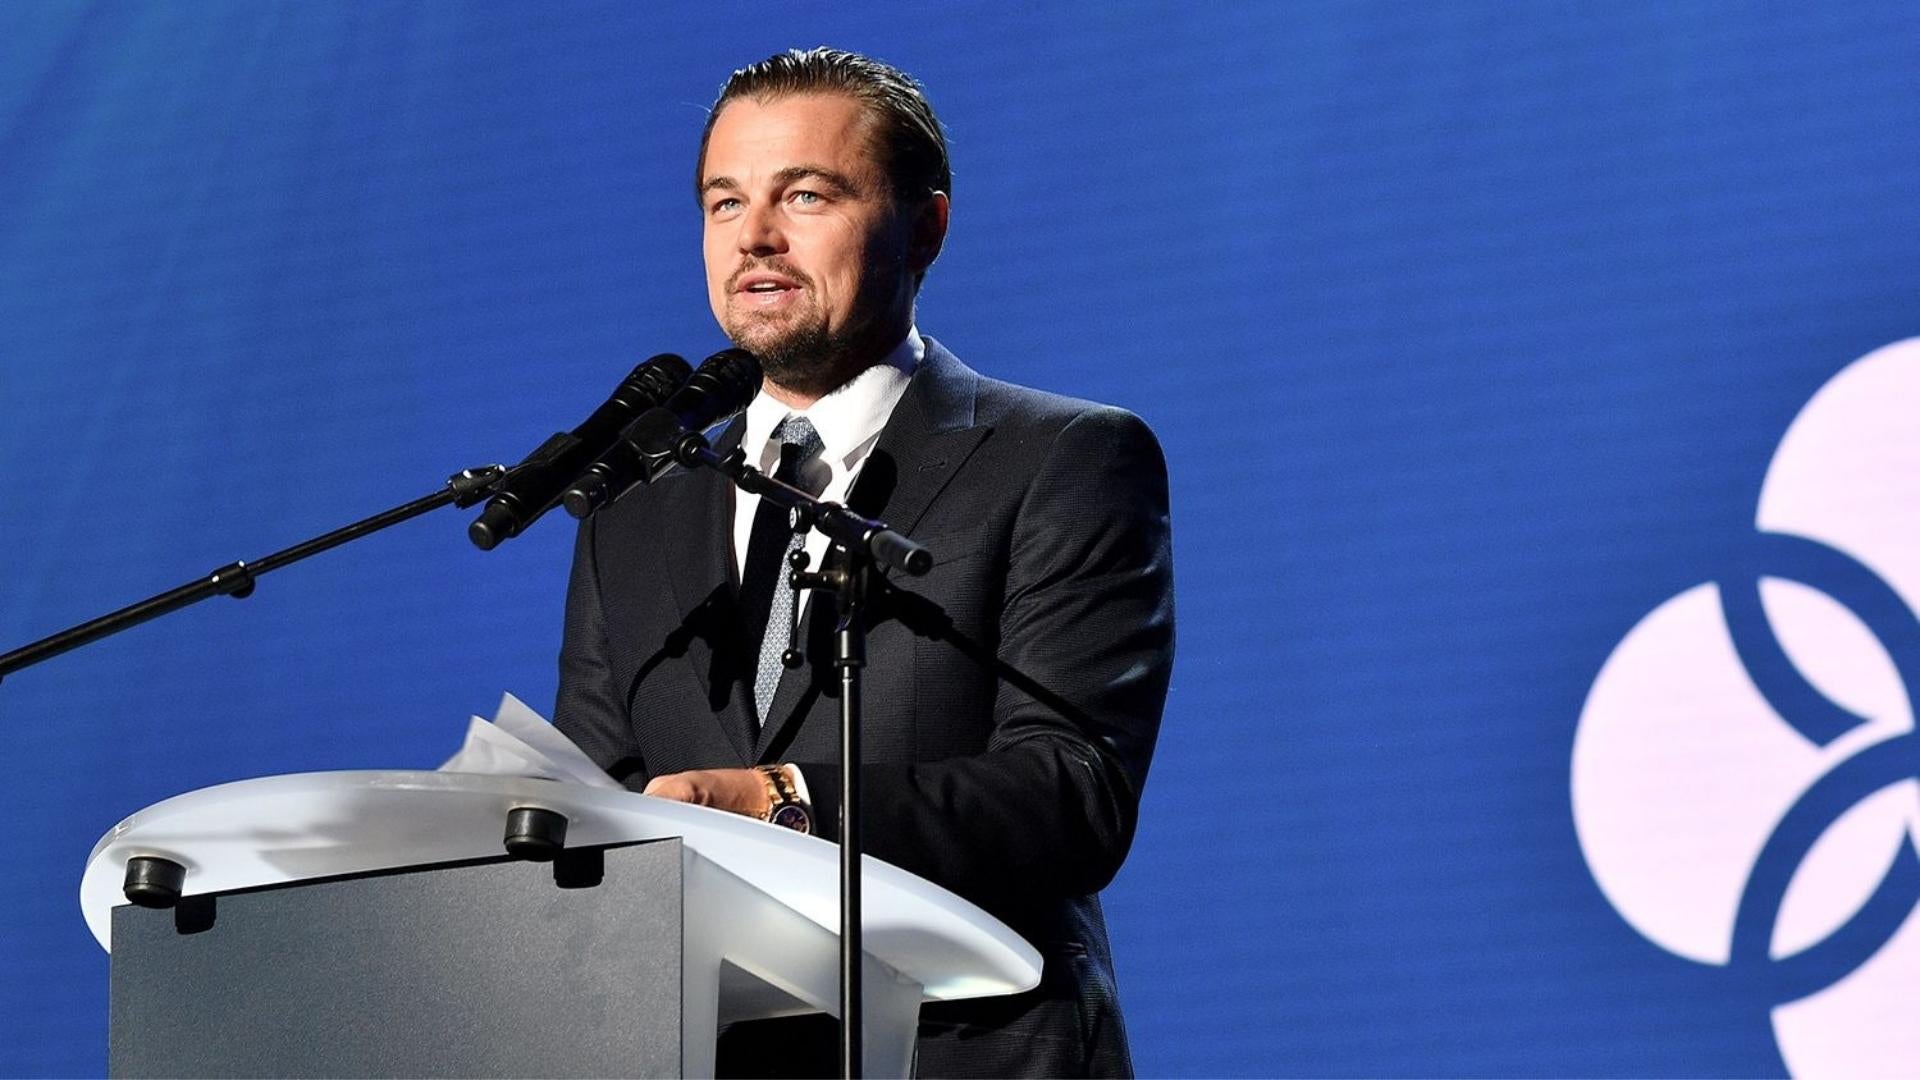 Actor and climate activist Leonardo DiCaprio speaking on stage